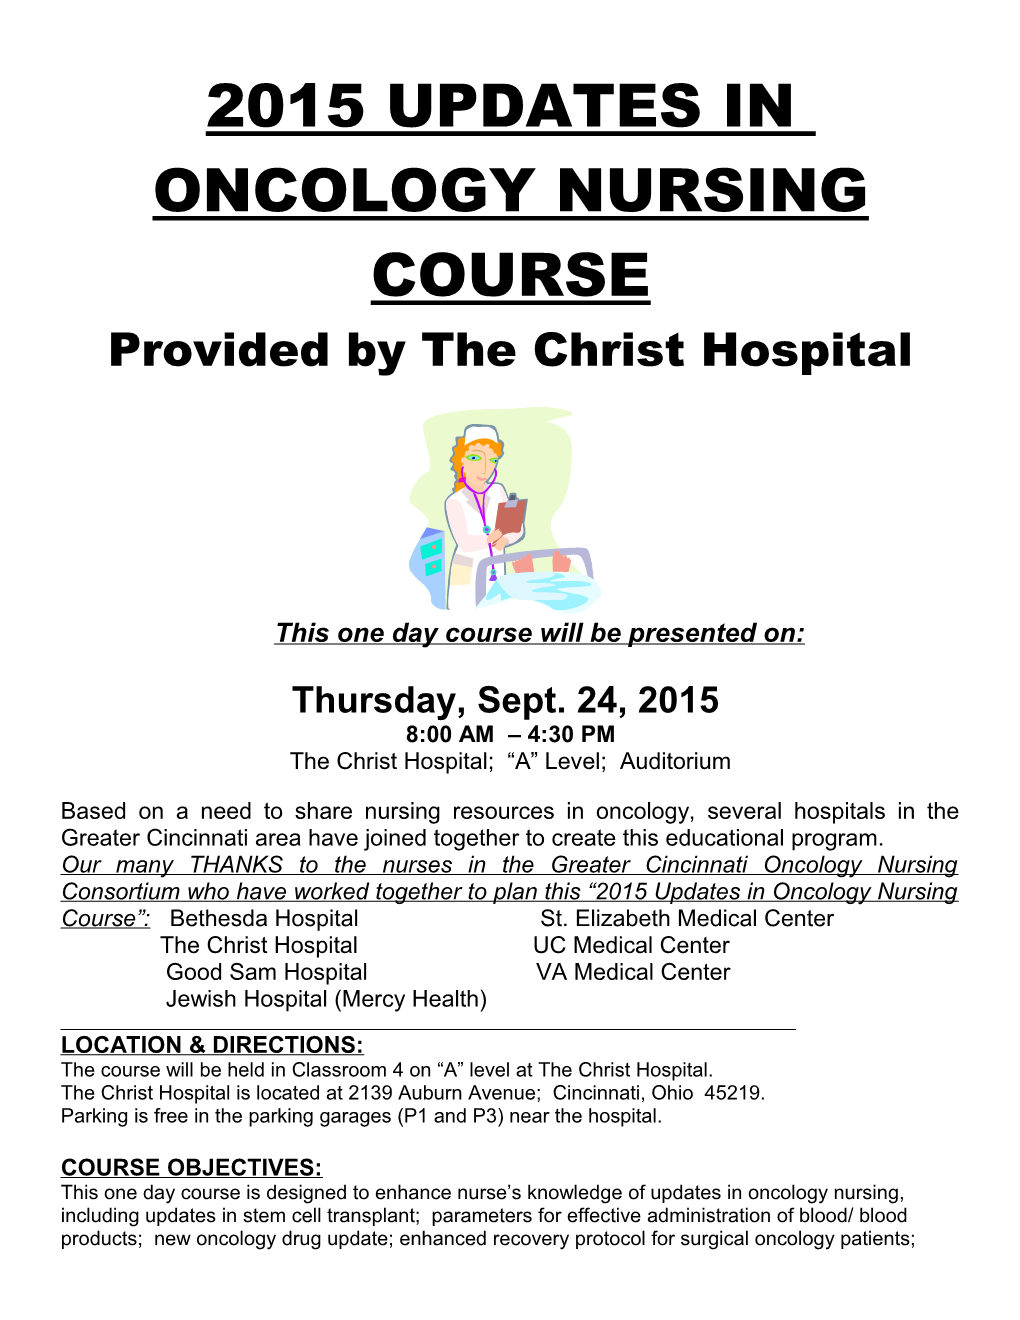 Oncology Nursing Certification Review Course s1